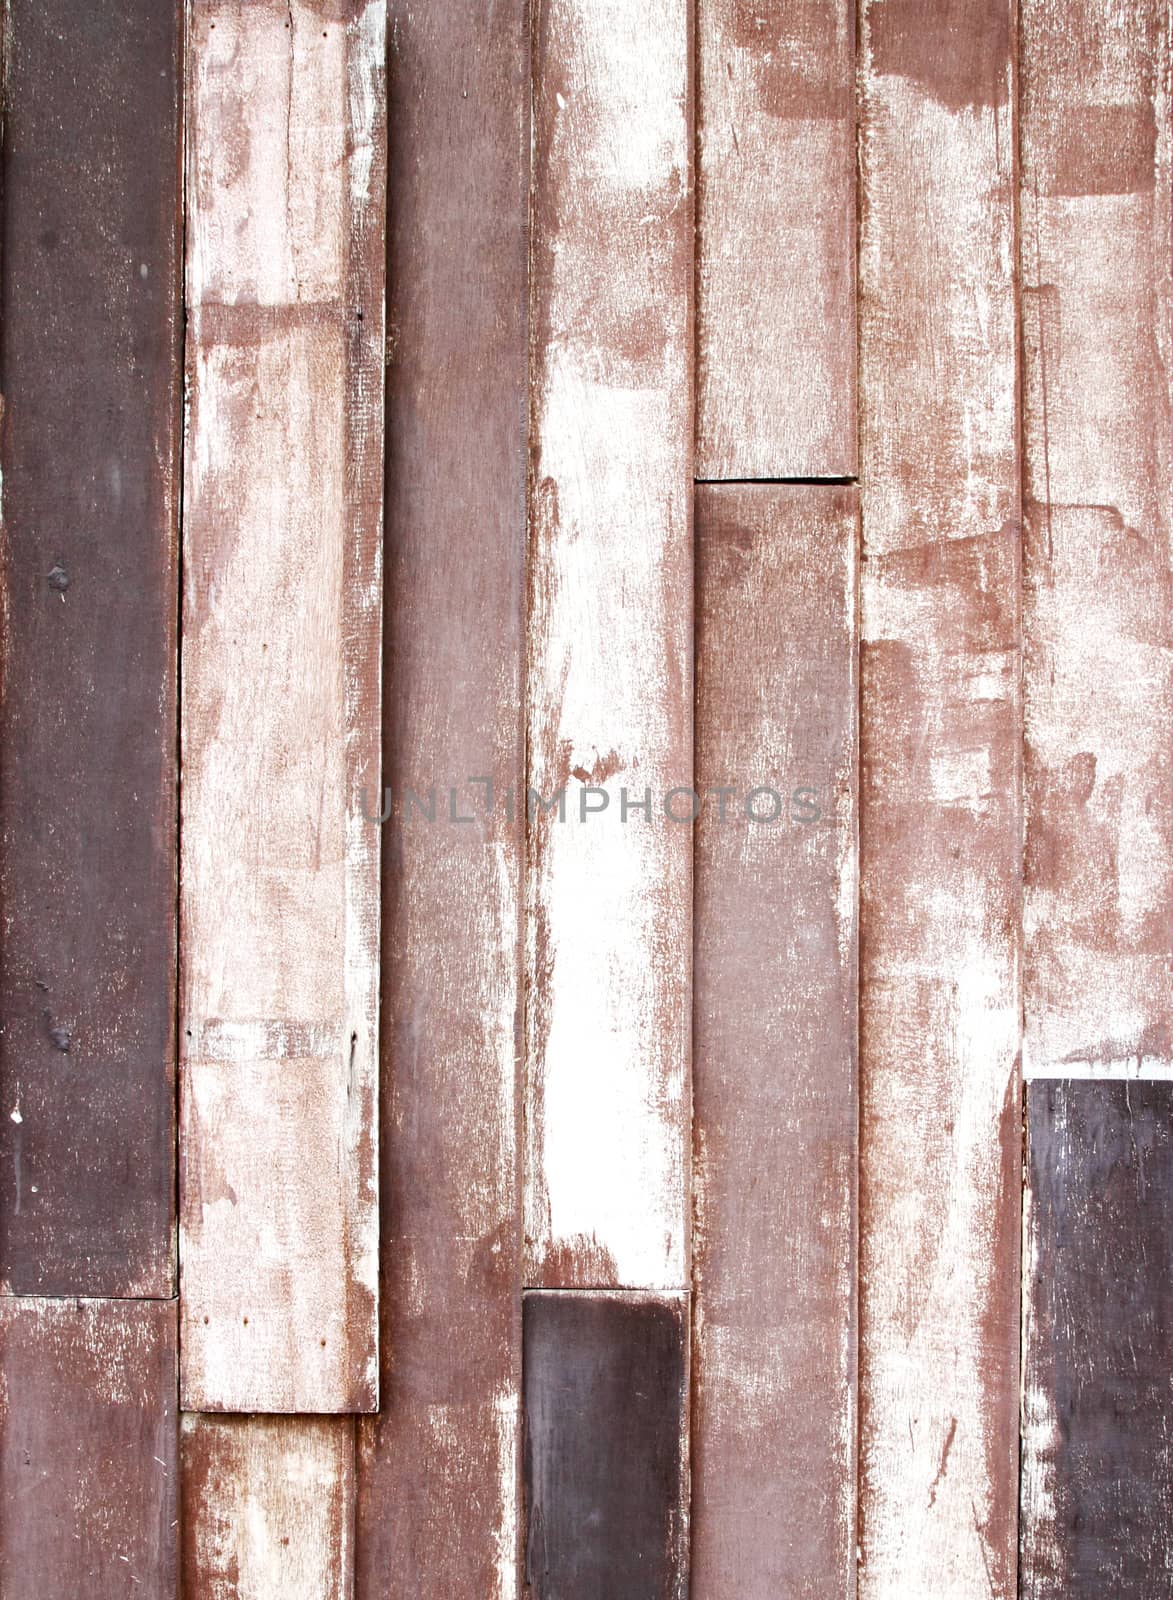 old wooden wall texture background